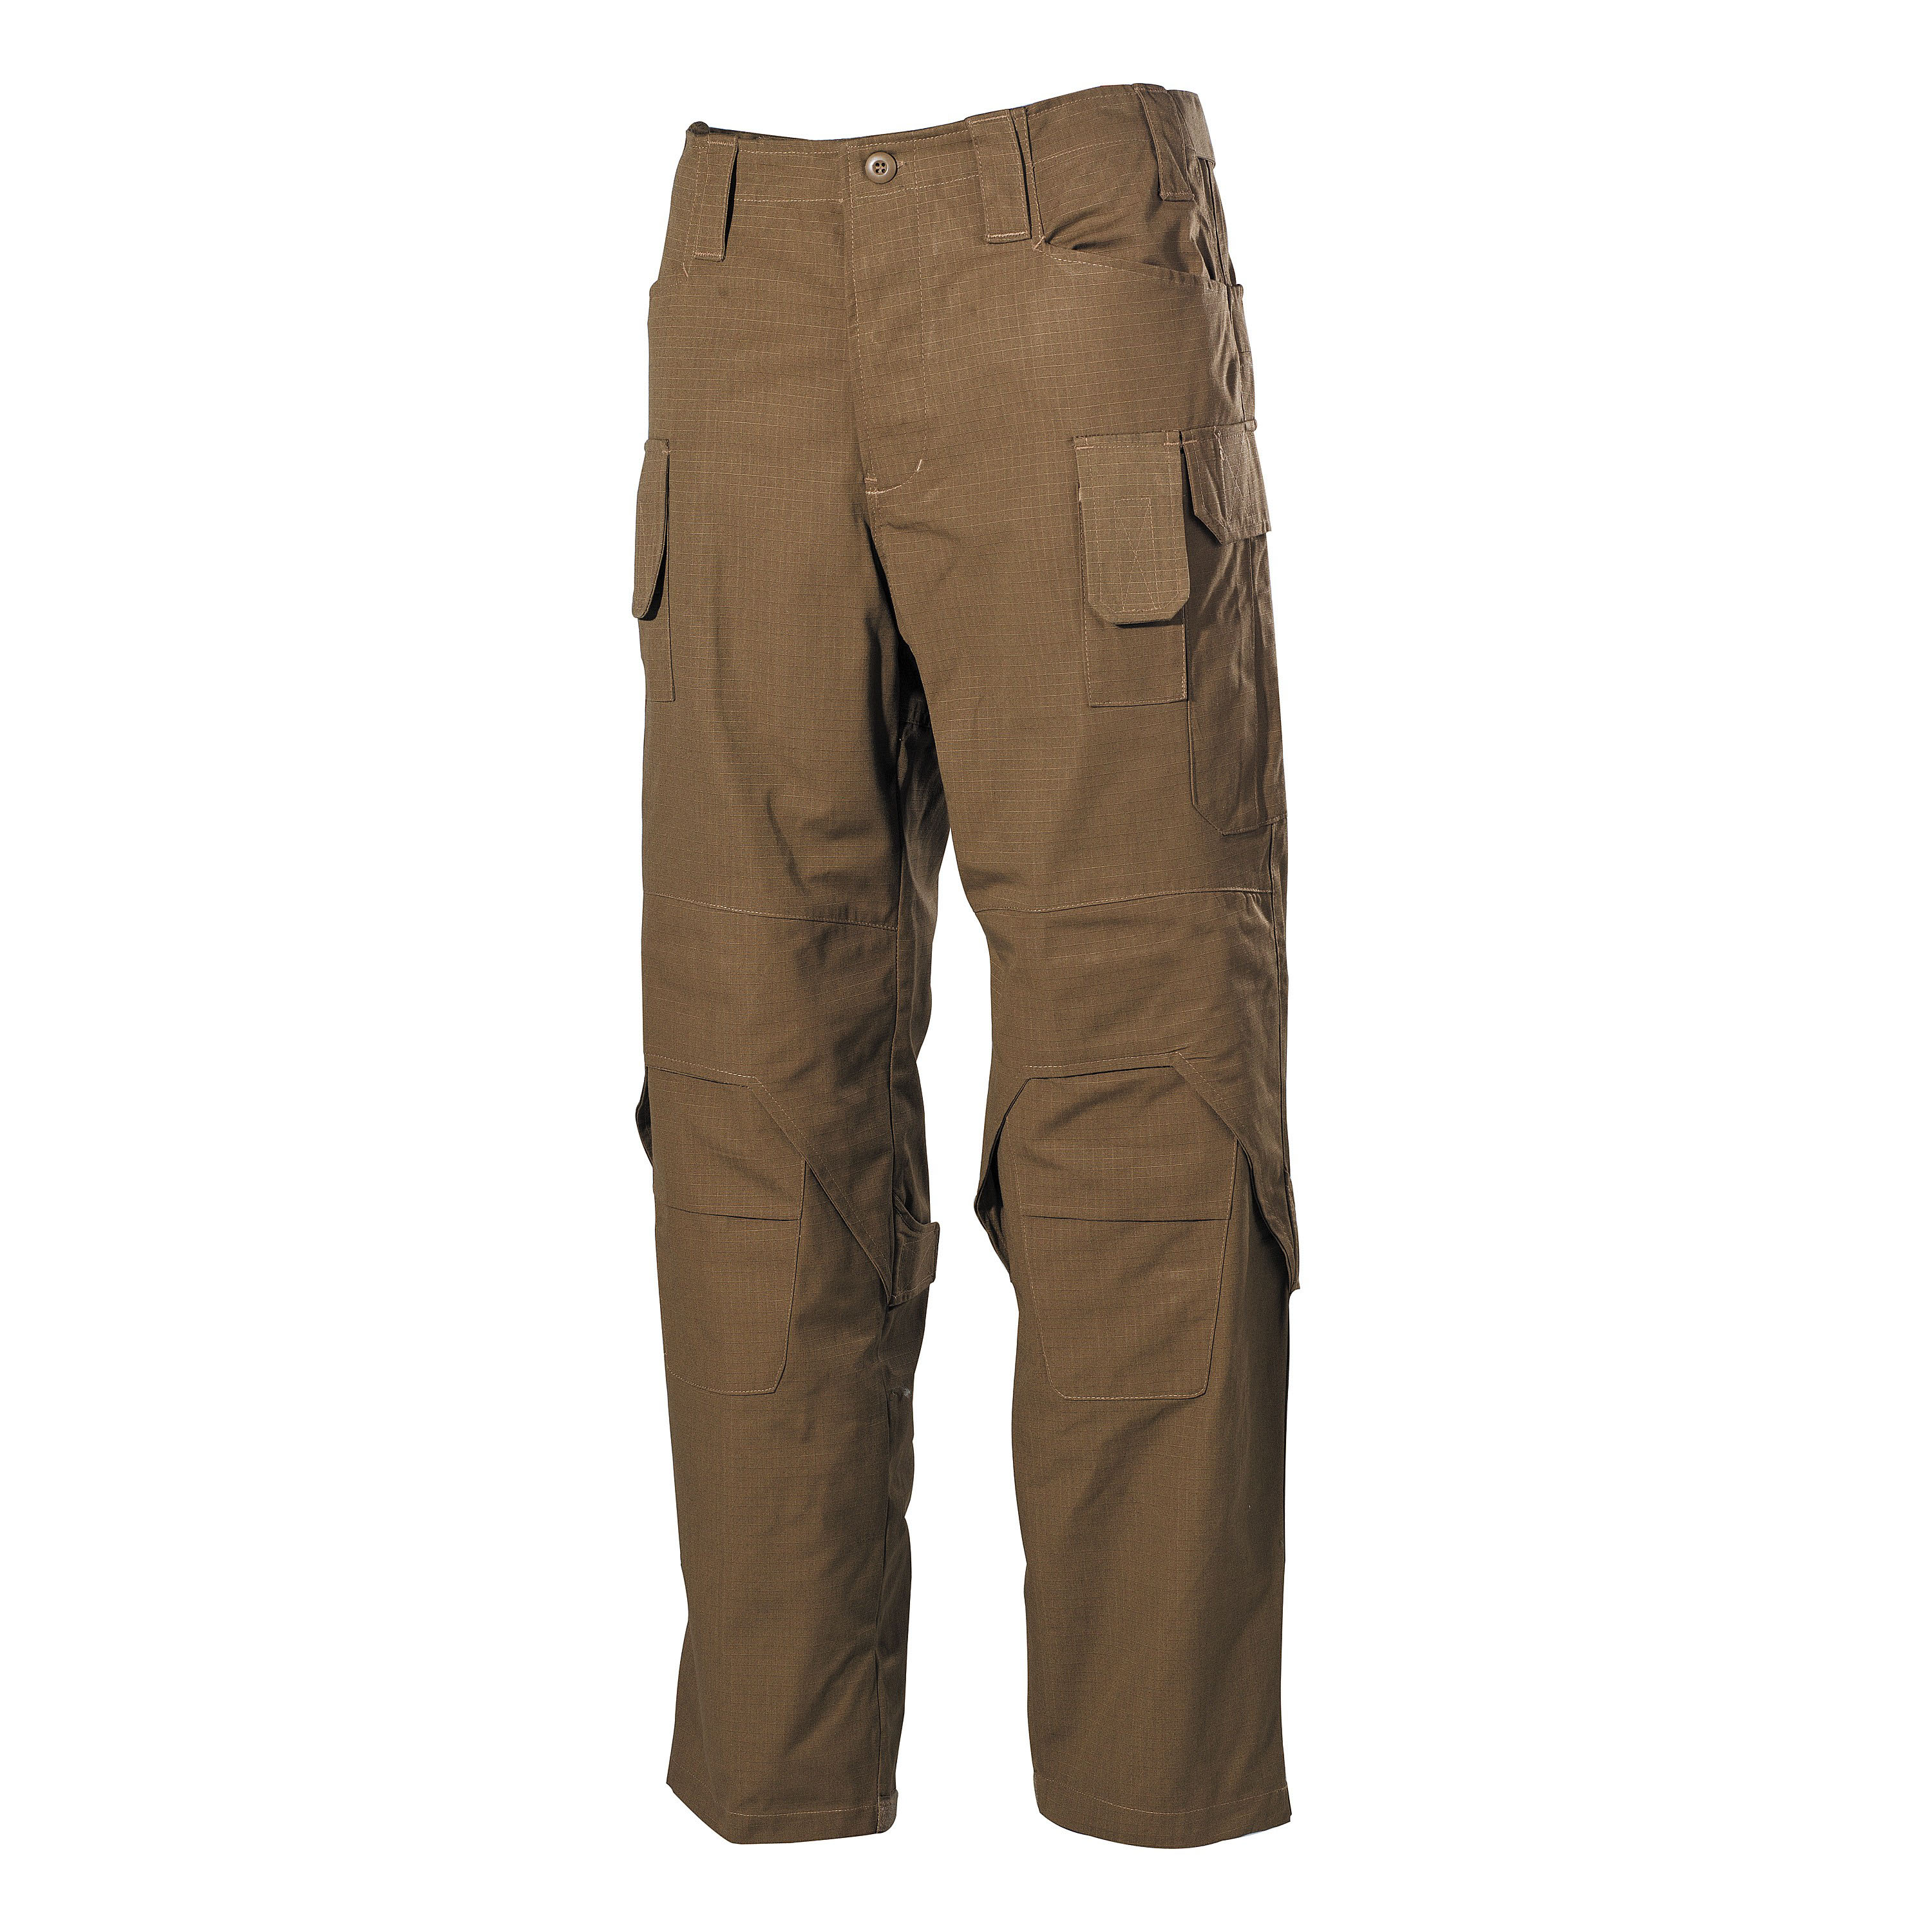 Purchase the MFH Combat Pants Mission coyote tan by ASMC